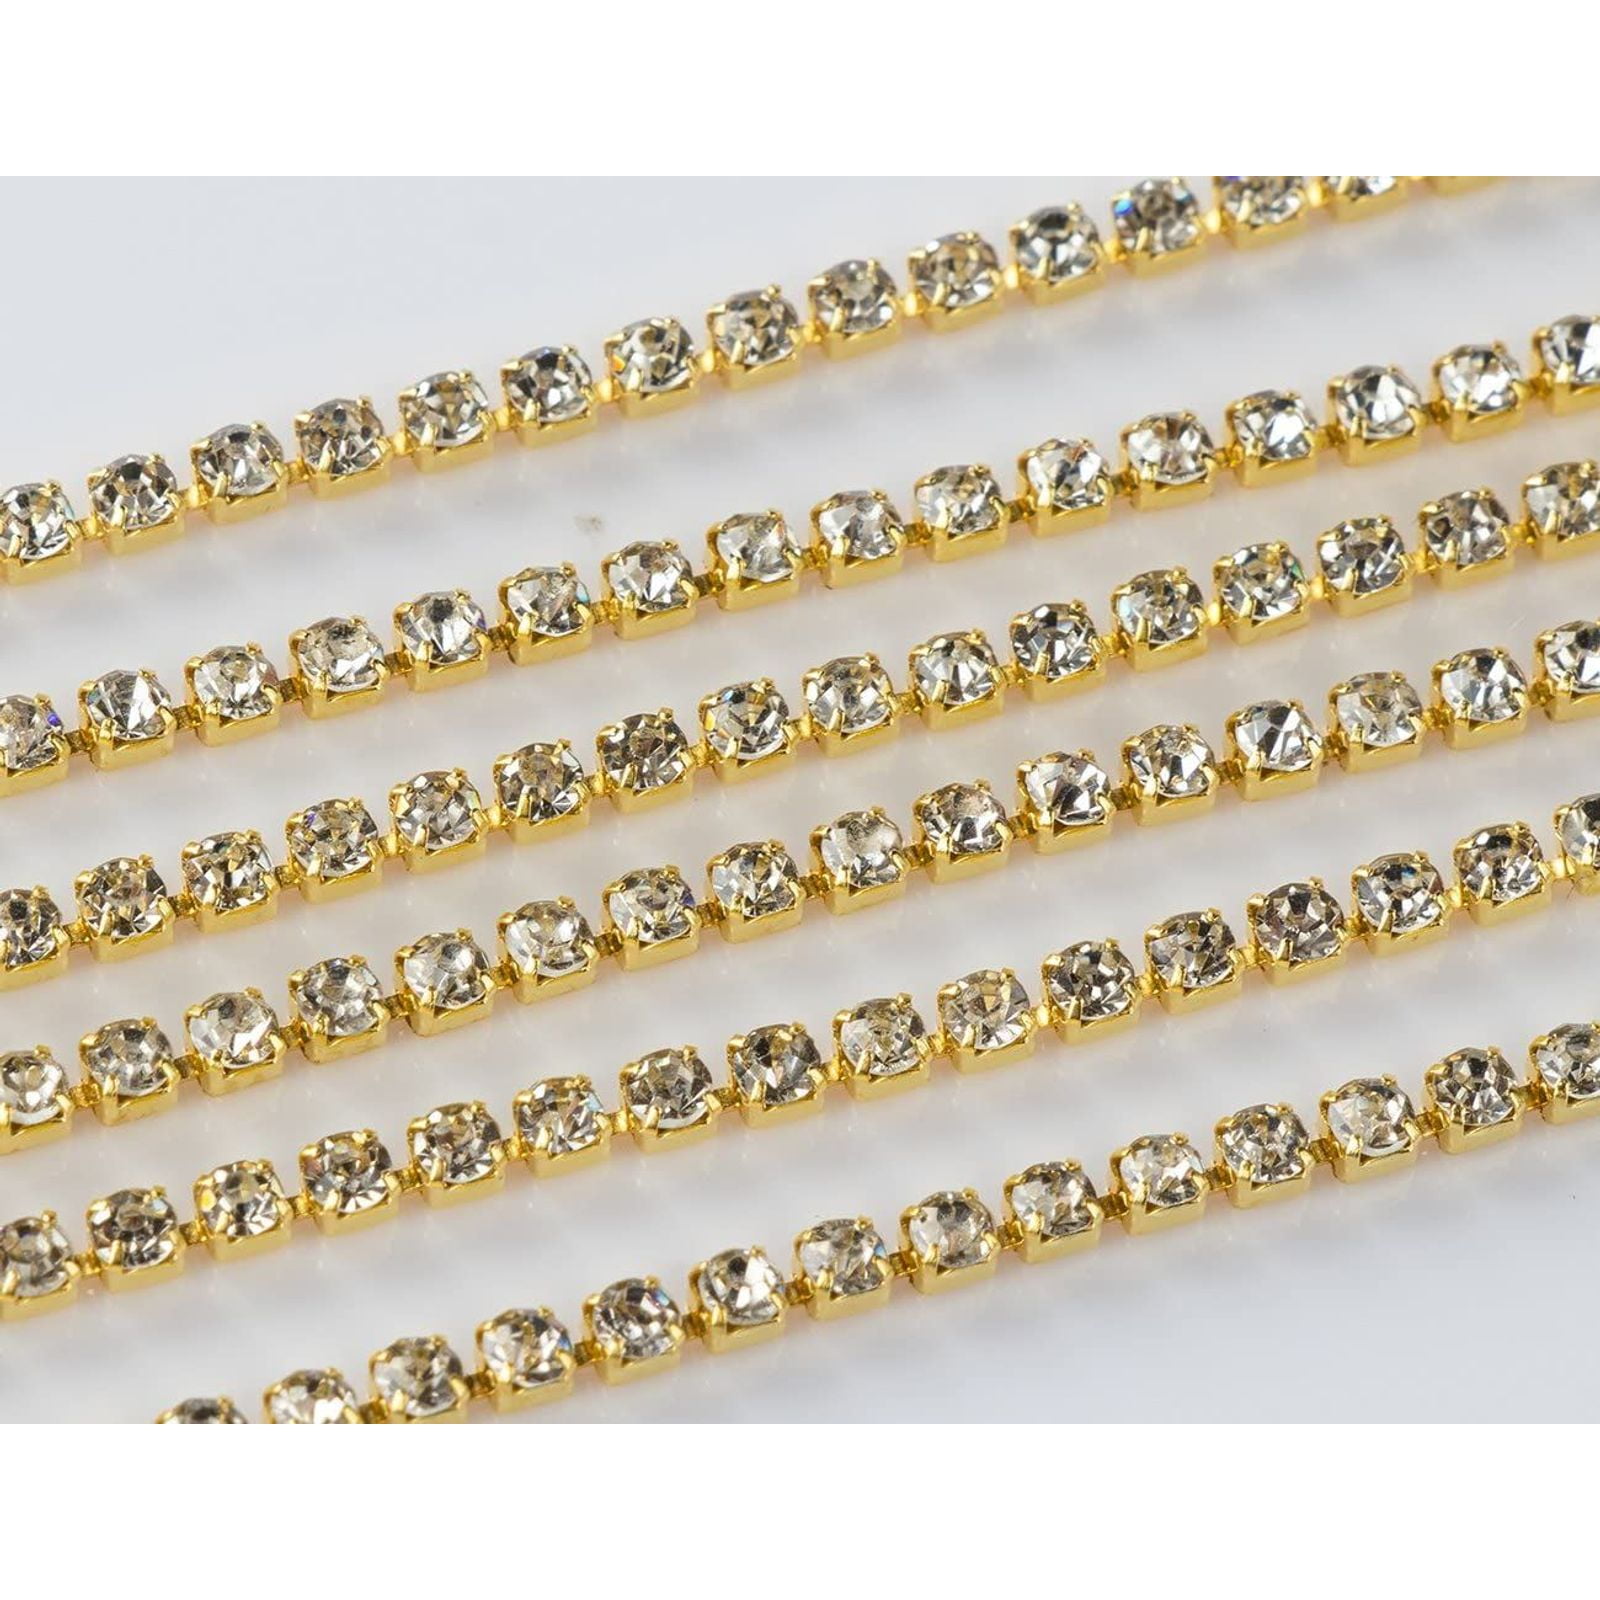 Details about   2-10 yards Yellow coffee crystal glass rhinestone close Silver chain Applique 